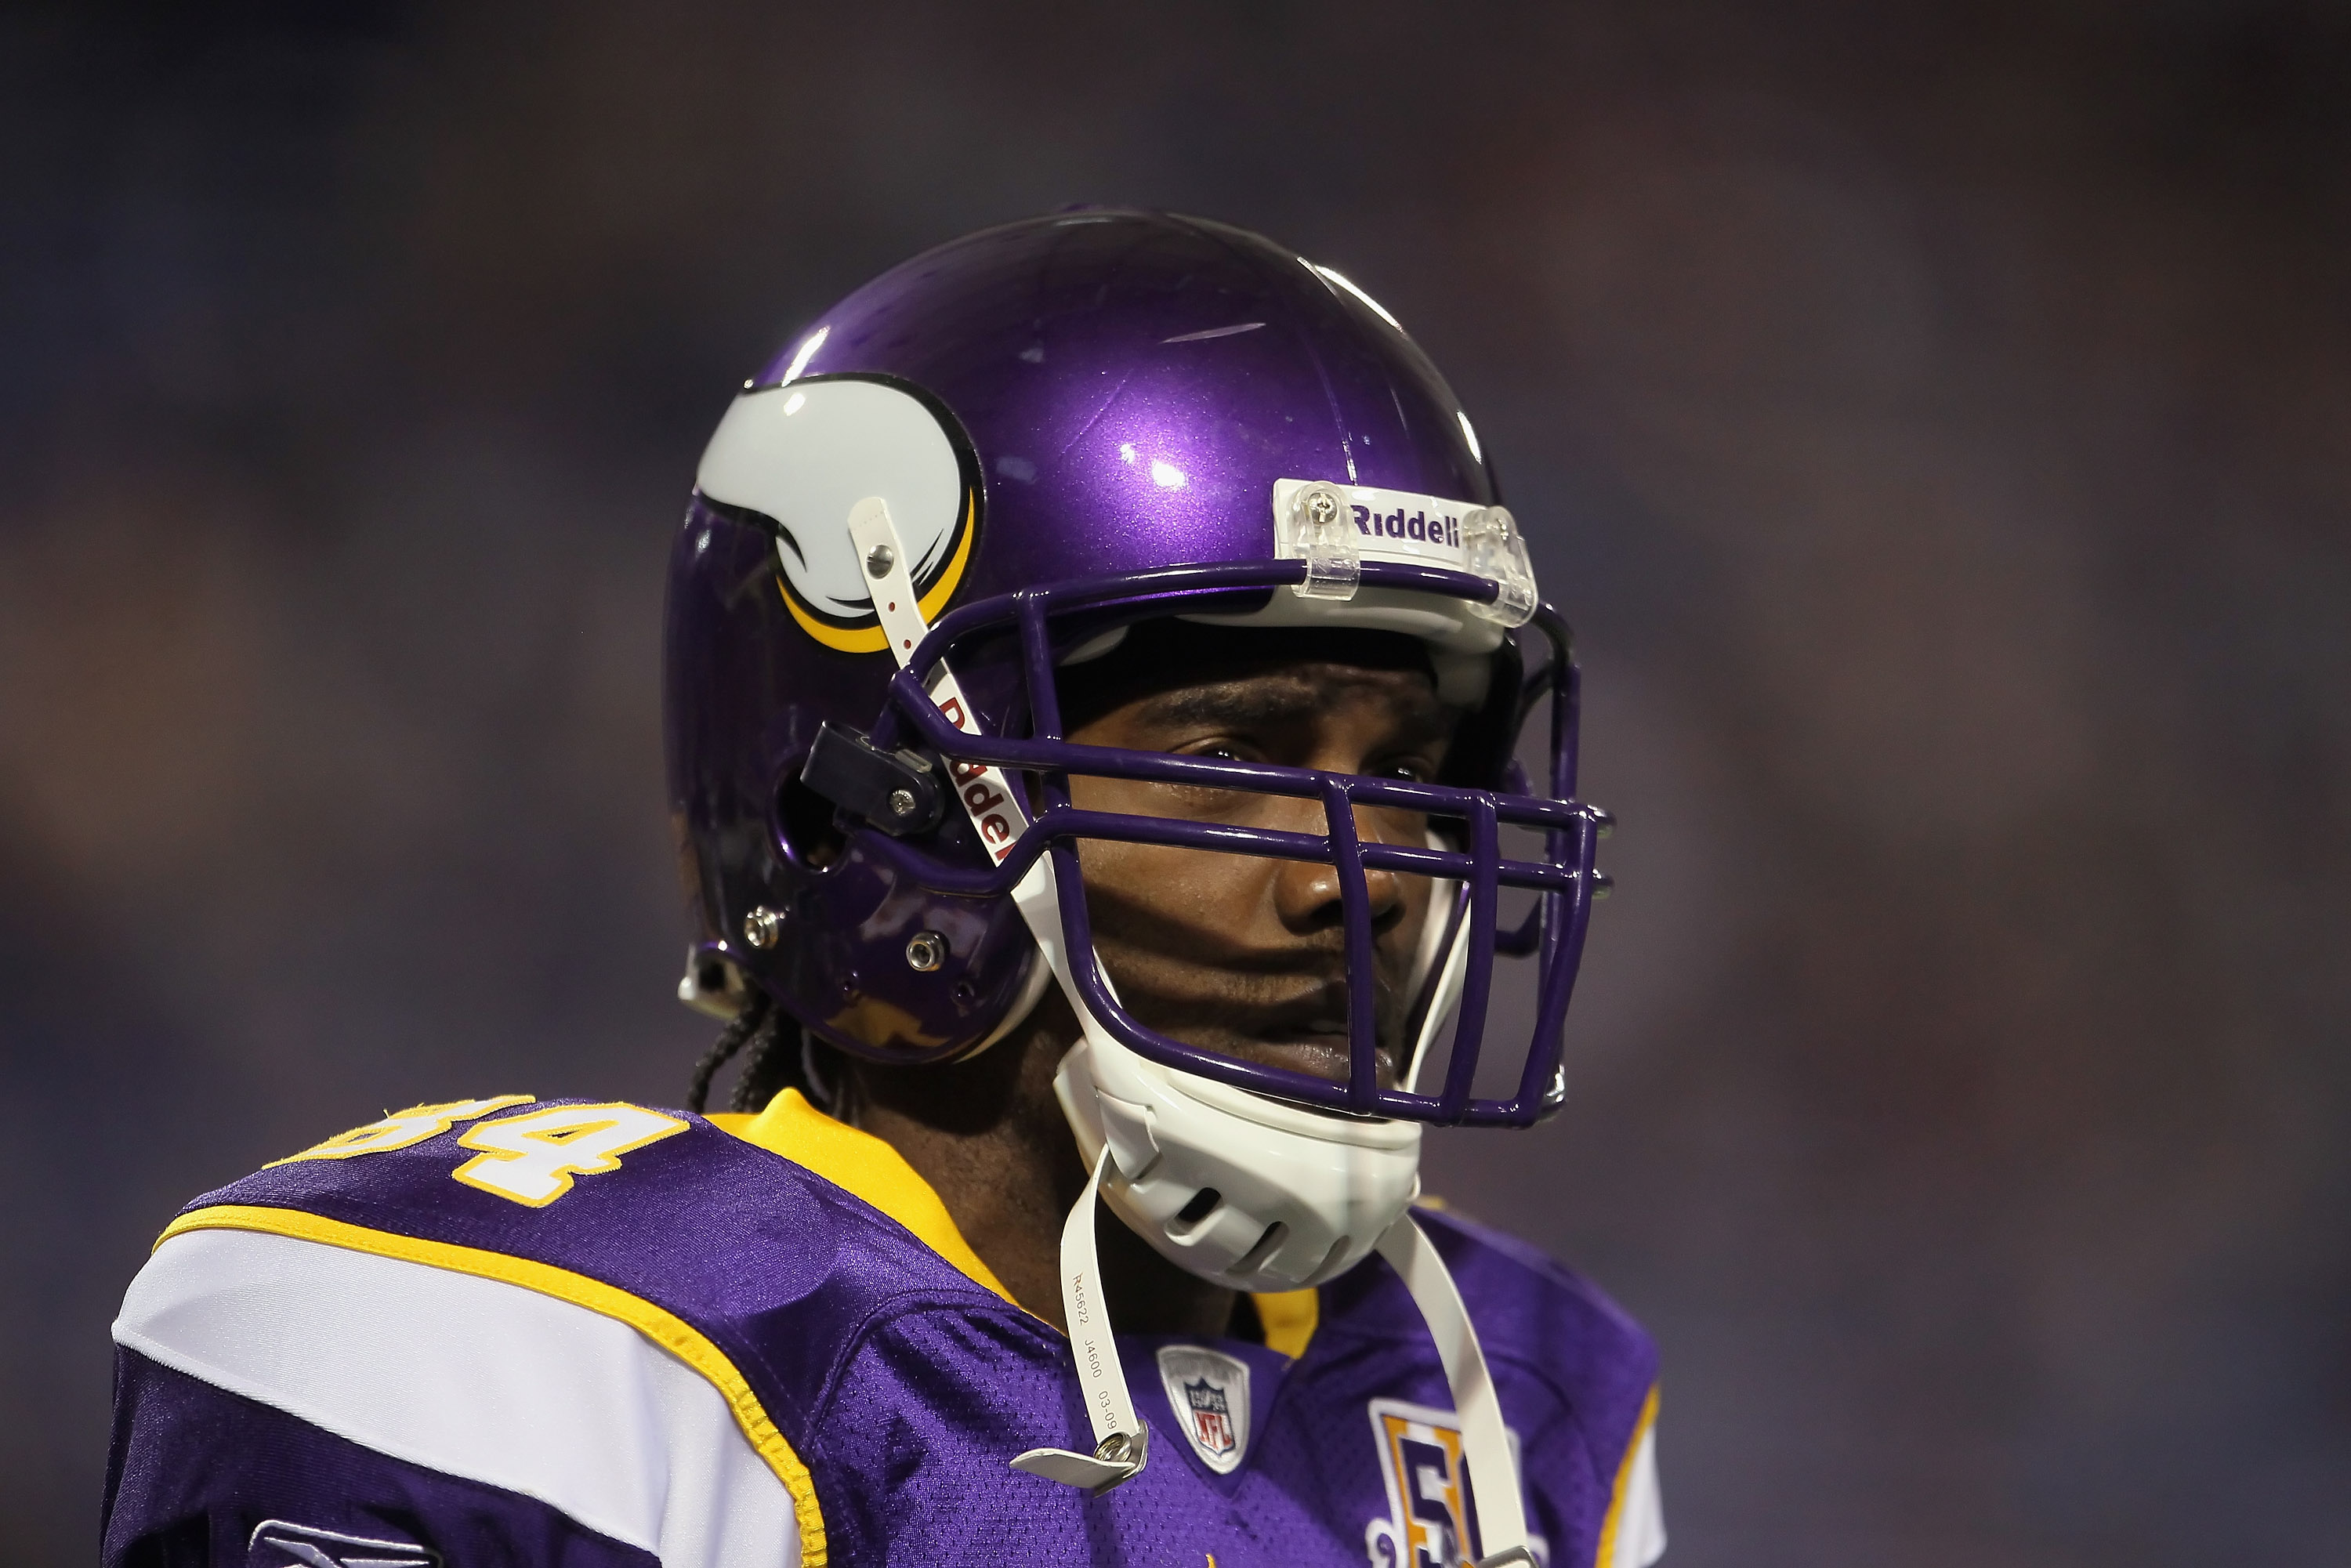 MINNEAPOLIS - OCTOBER 17:  Wide receiver Randy Moss #84 the Minnesota Vikings looks on prior to the start of the game against the Dallas Cowboys at Mall of America Field on October 17, 2010 in Minneapolis, Minnesota.  (Photo by Jeff Gross/Getty Images)